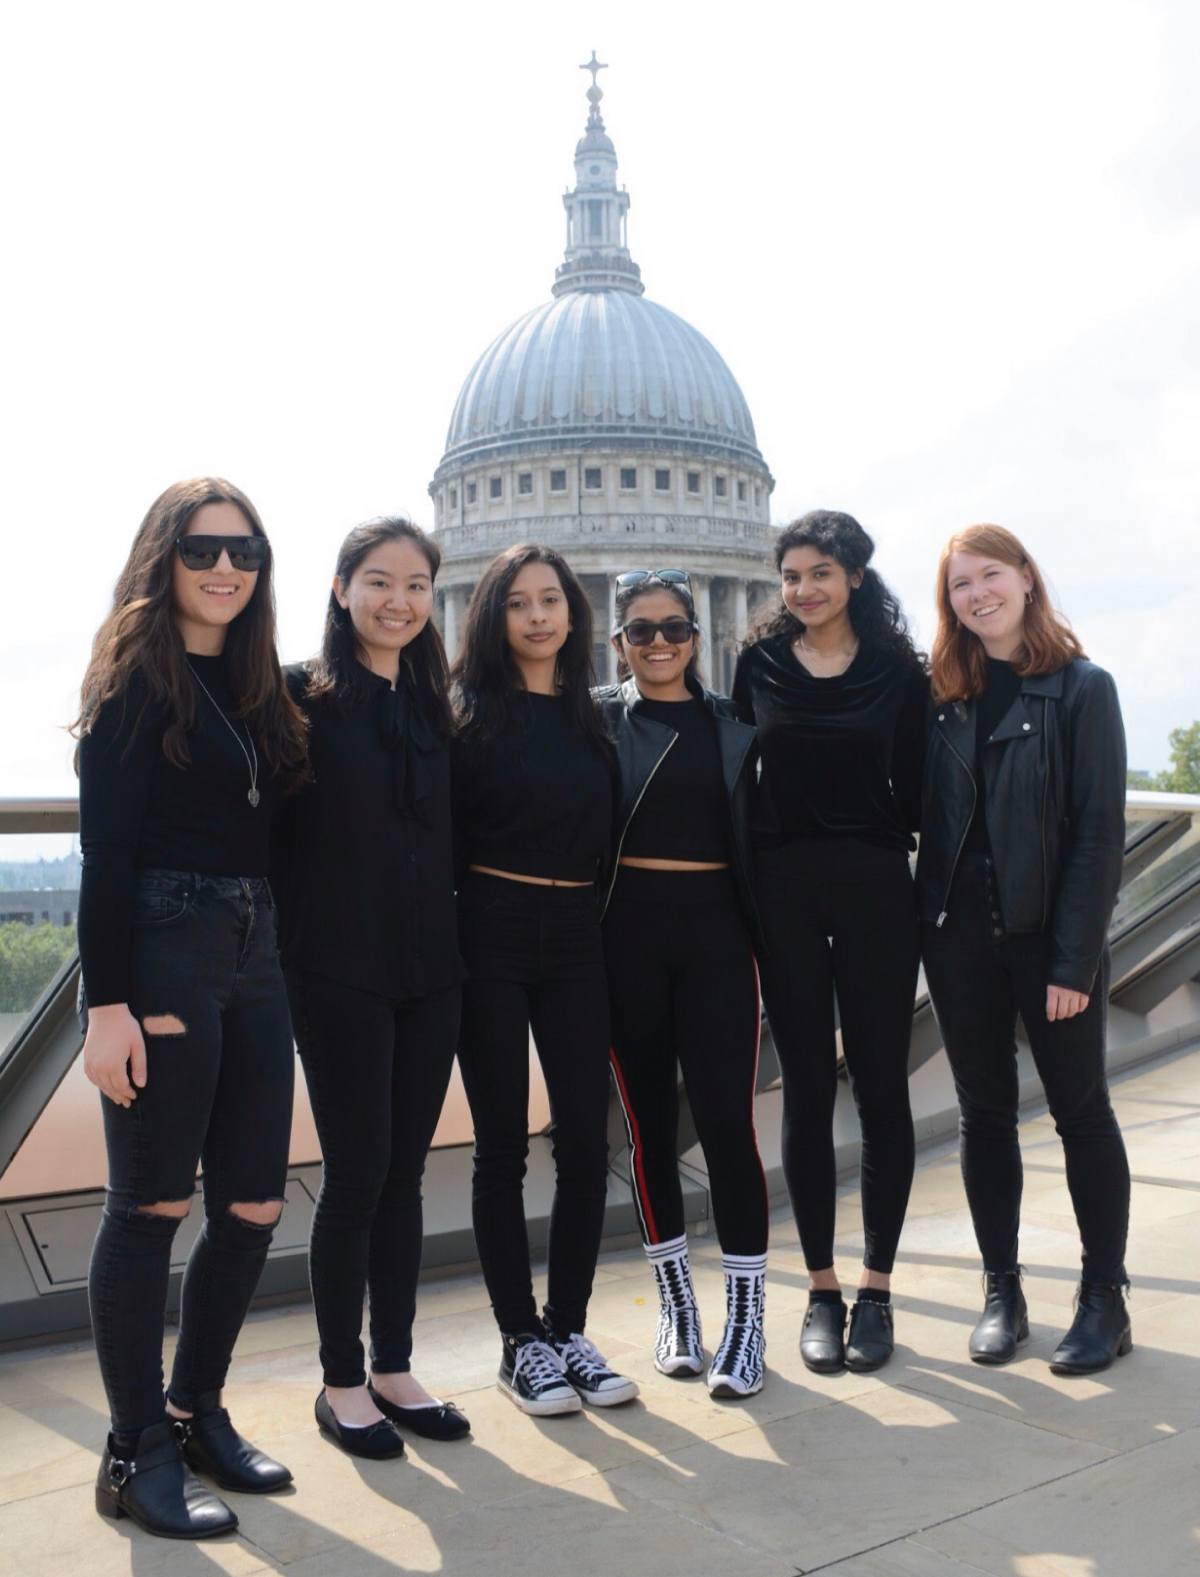 Trisha Gupta with friends in London during a study abroad trip